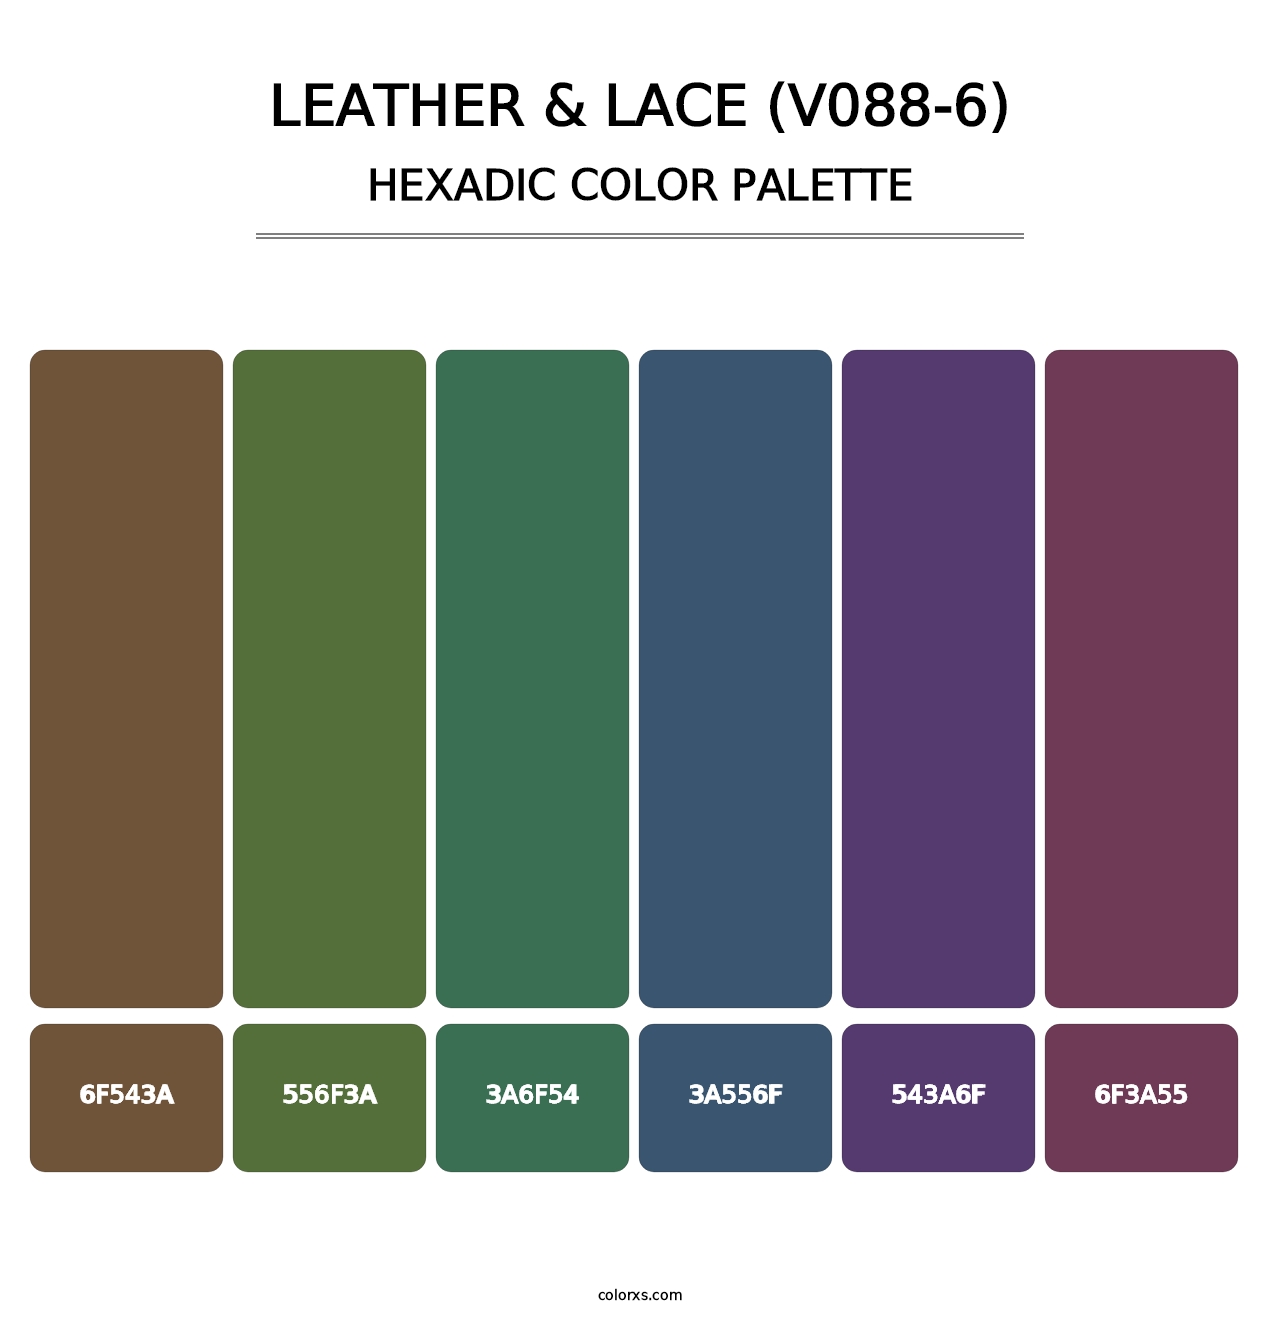 Leather & Lace (V088-6) - Hexadic Color Palette